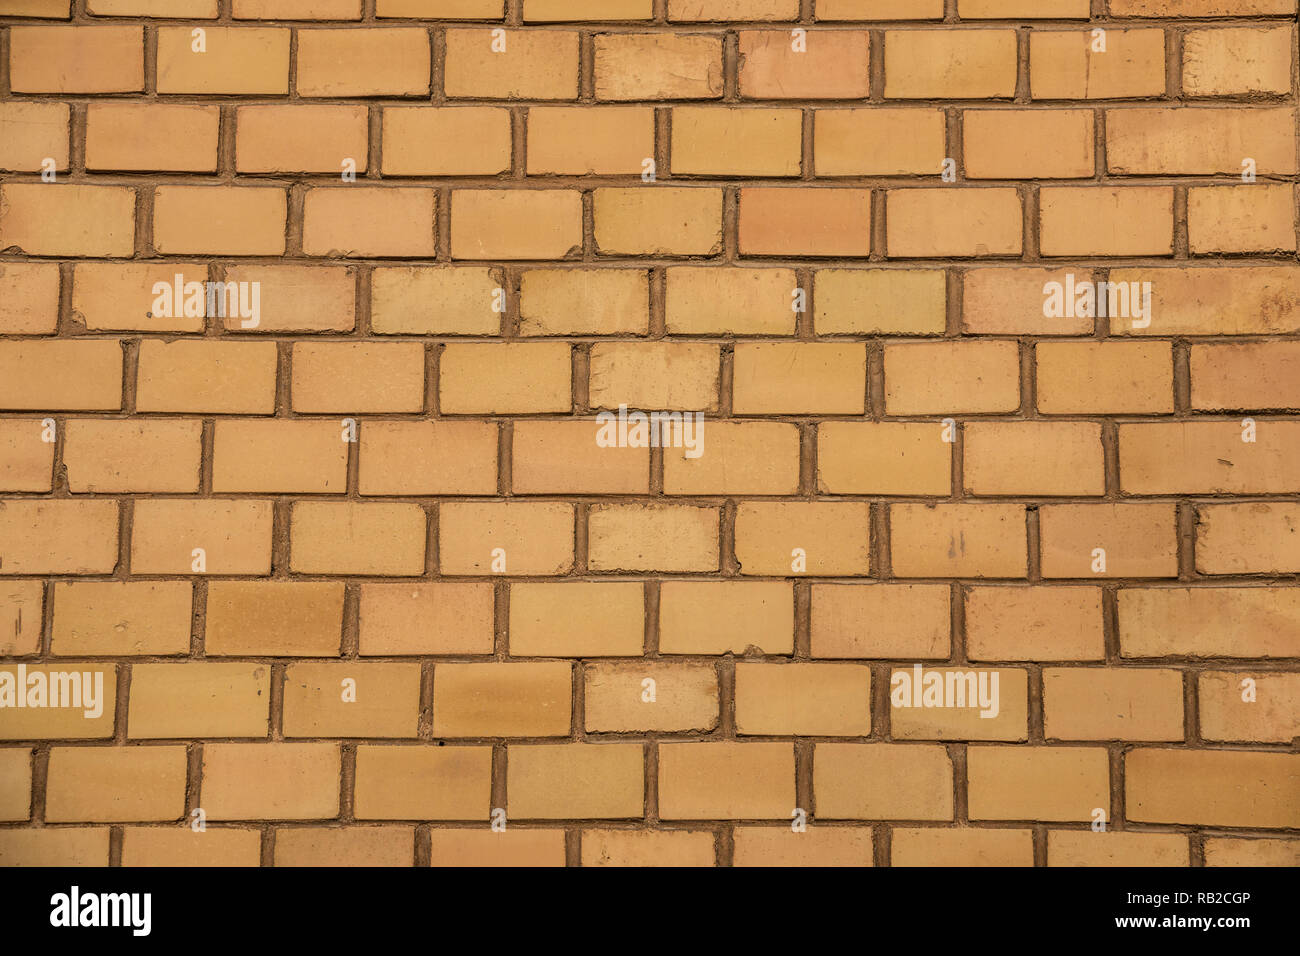 Old empty brick house factory wall with yellow bricks Stock Photo